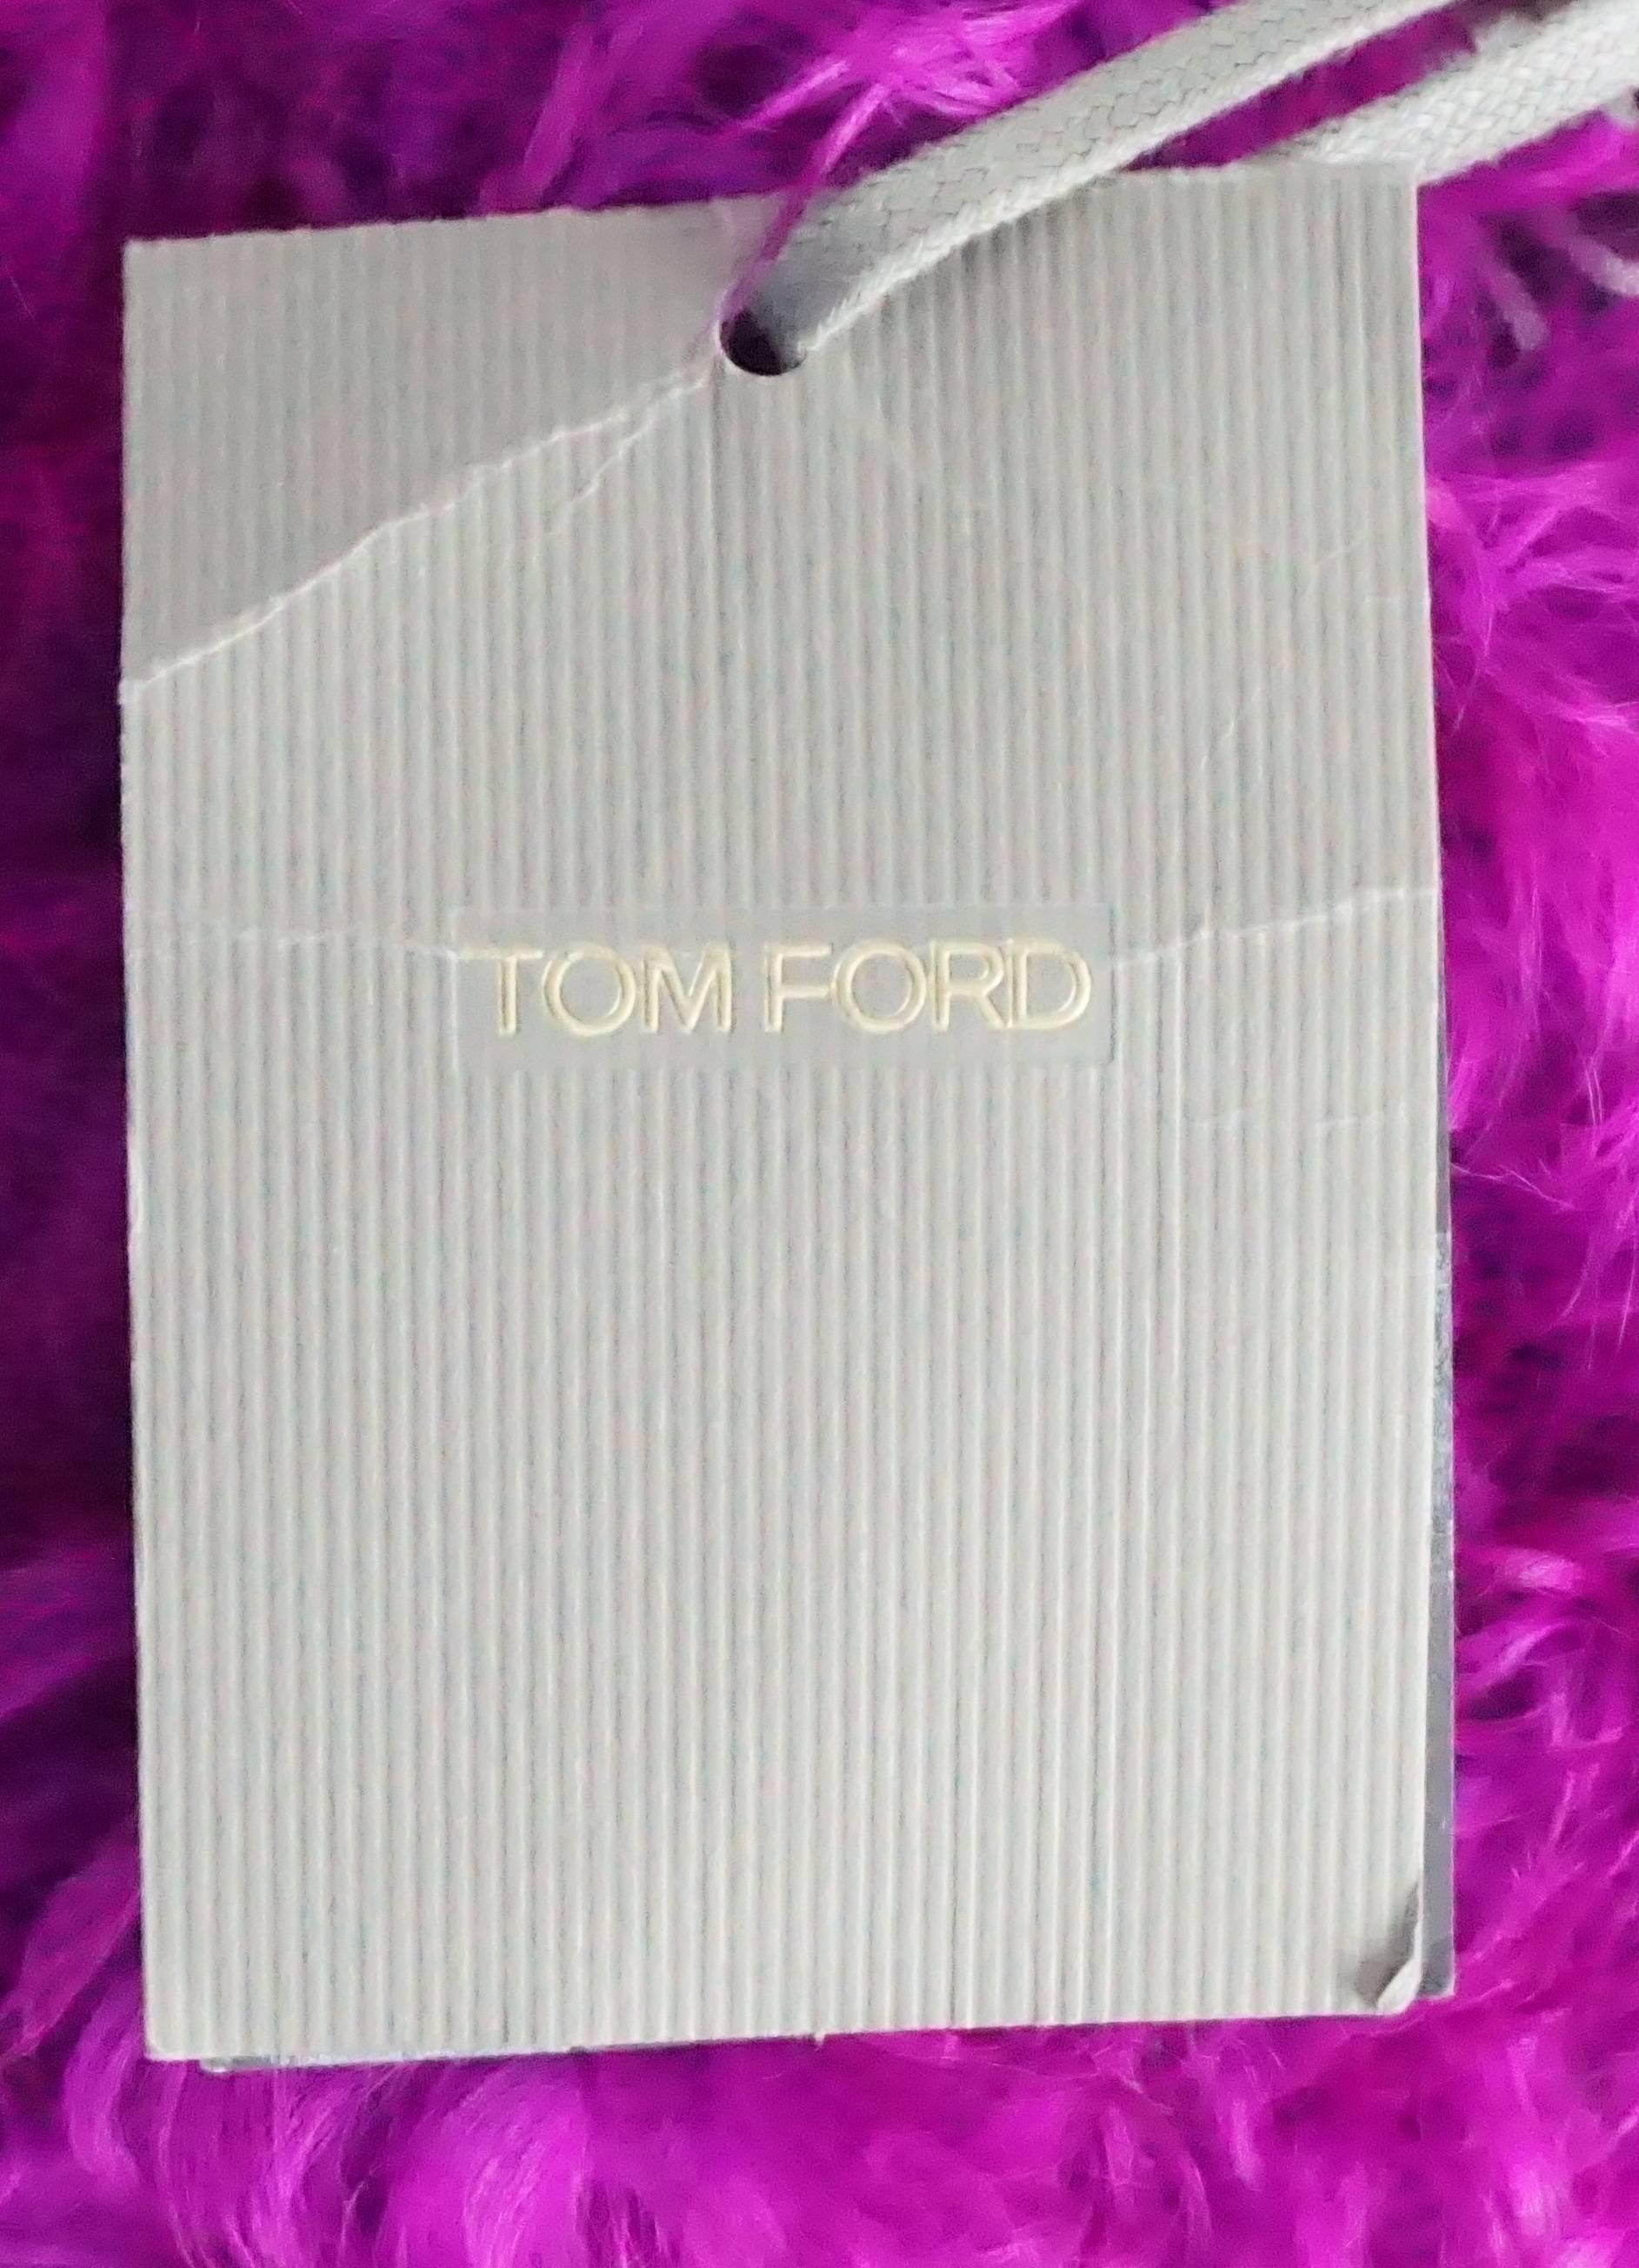 Tom Ford Multi Color and Fur Runway Jacket, 2013 Collection 2